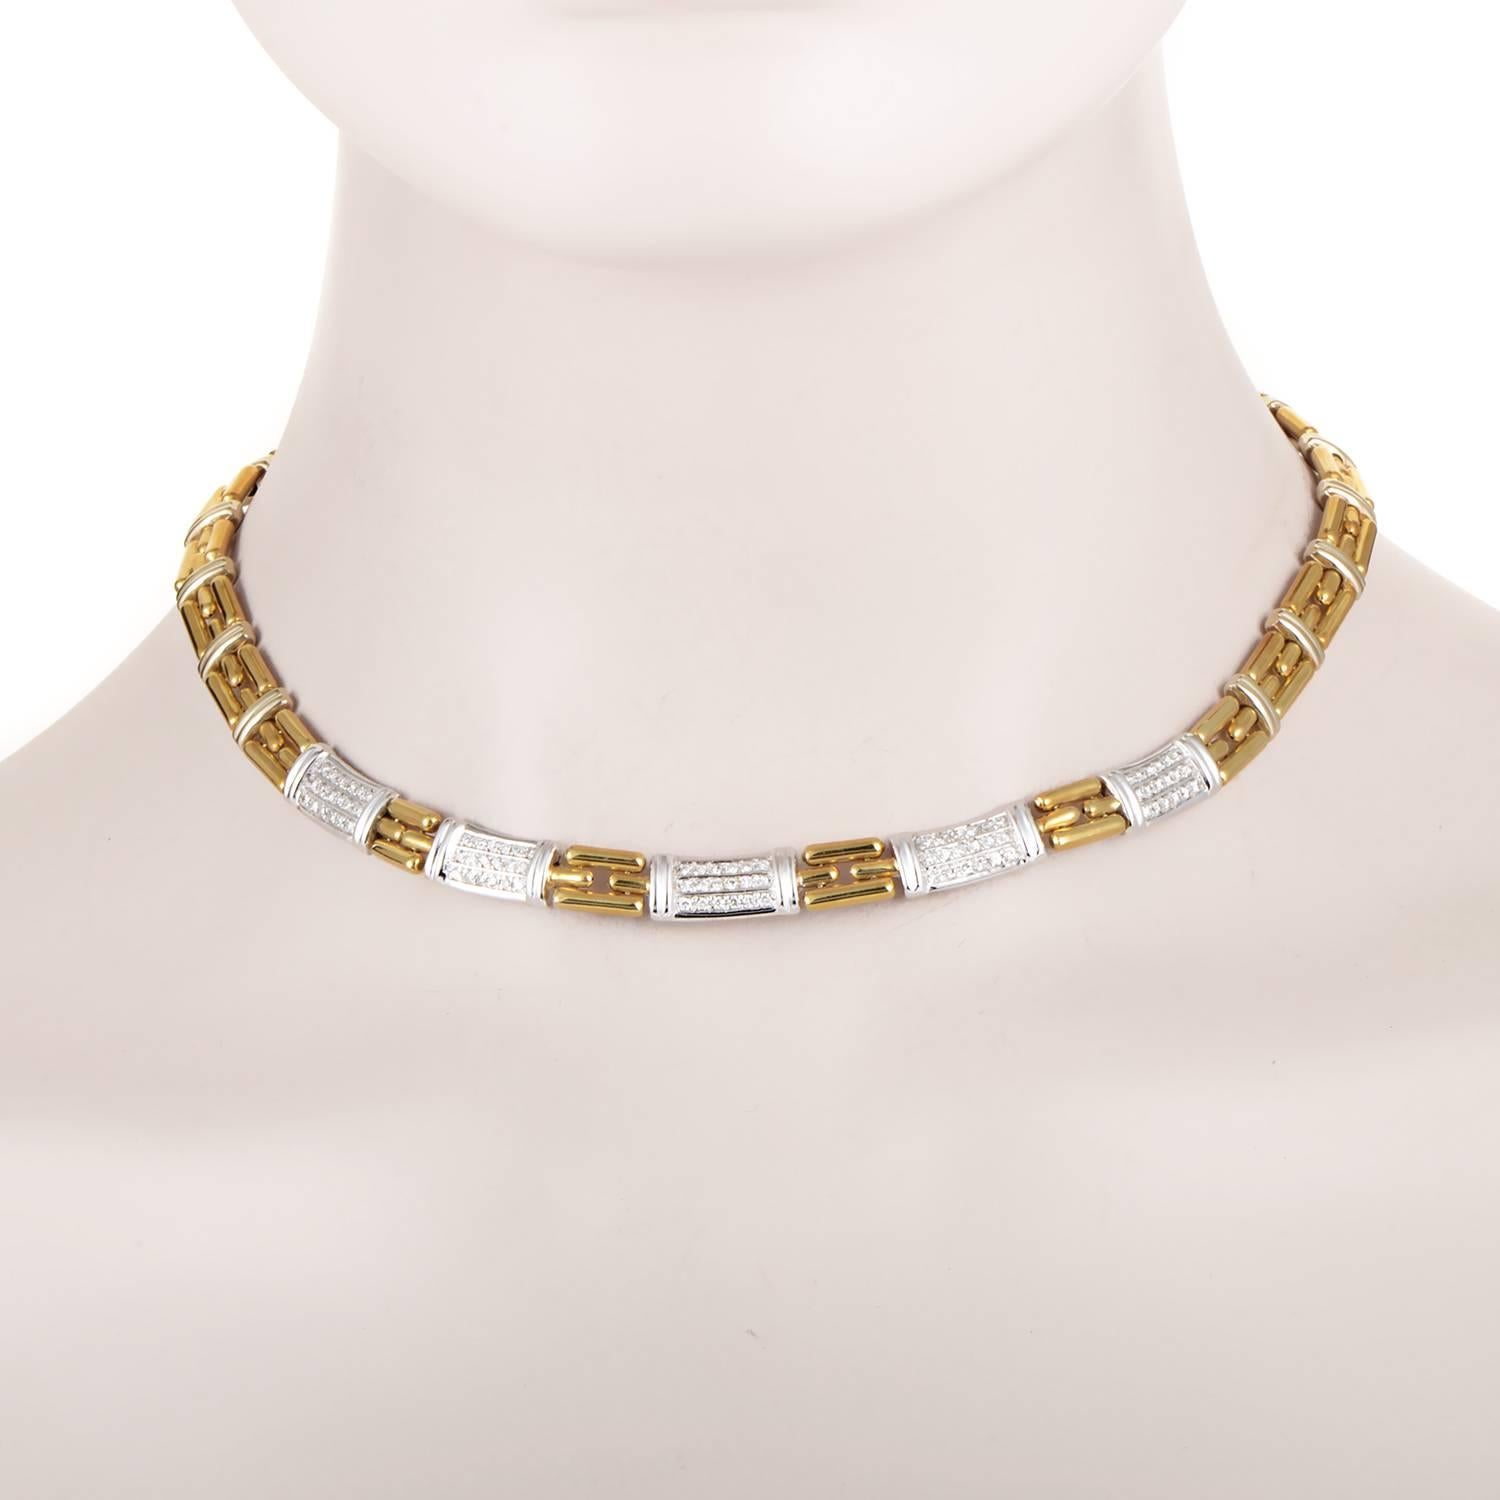 The intriguing structure and graceful interplay of radiant 18K yellow gold links create a mesmerizing visual effect in this gorgeous necklace from Chimento, while the shimmering 18K white gold is embellished with lustrous diamonds totaling